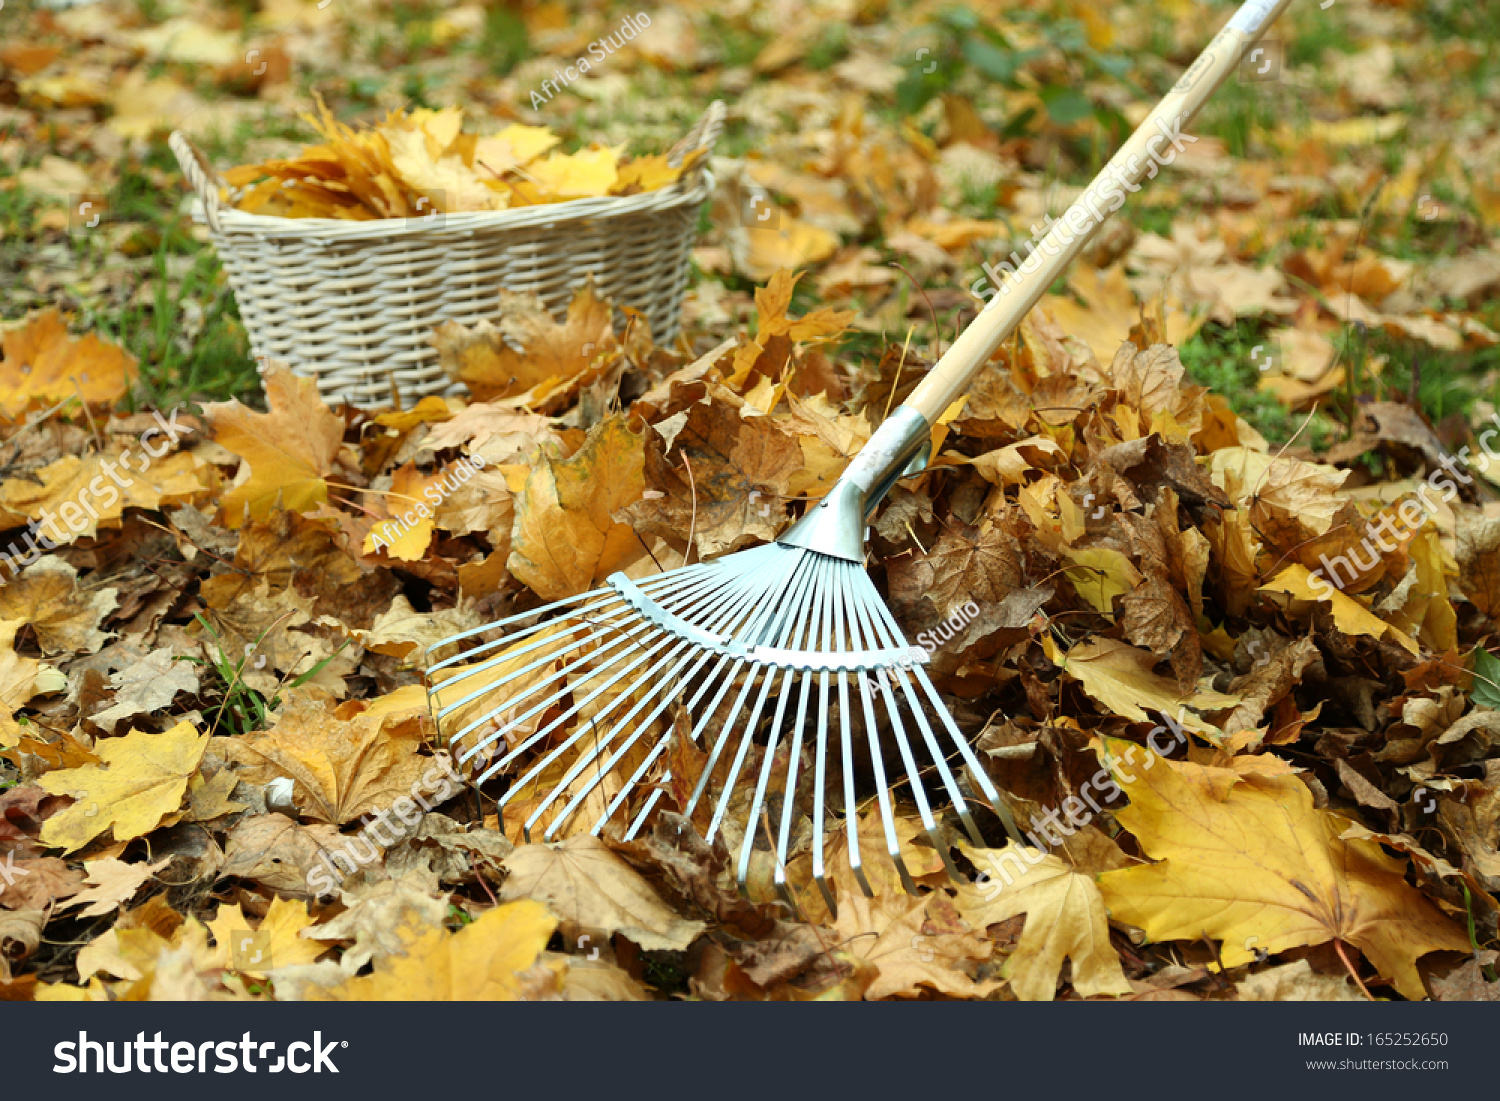 Cleaning Of Autumn Leaves On A Green Lawn Stock Photo 165252650 ...